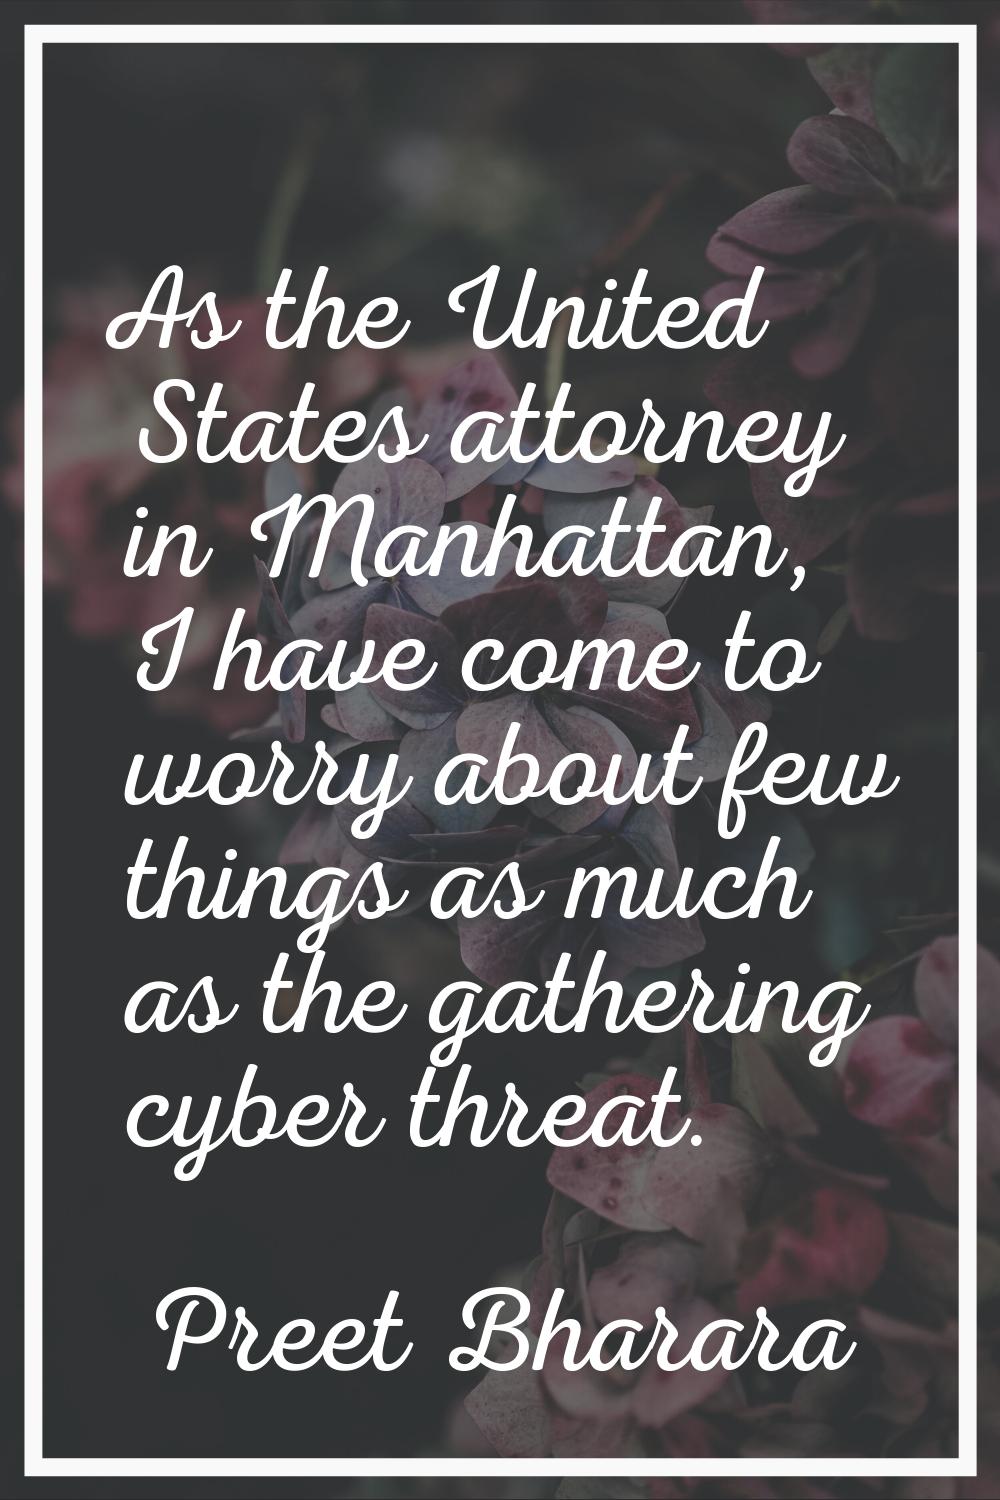 As the United States attorney in Manhattan, I have come to worry about few things as much as the ga